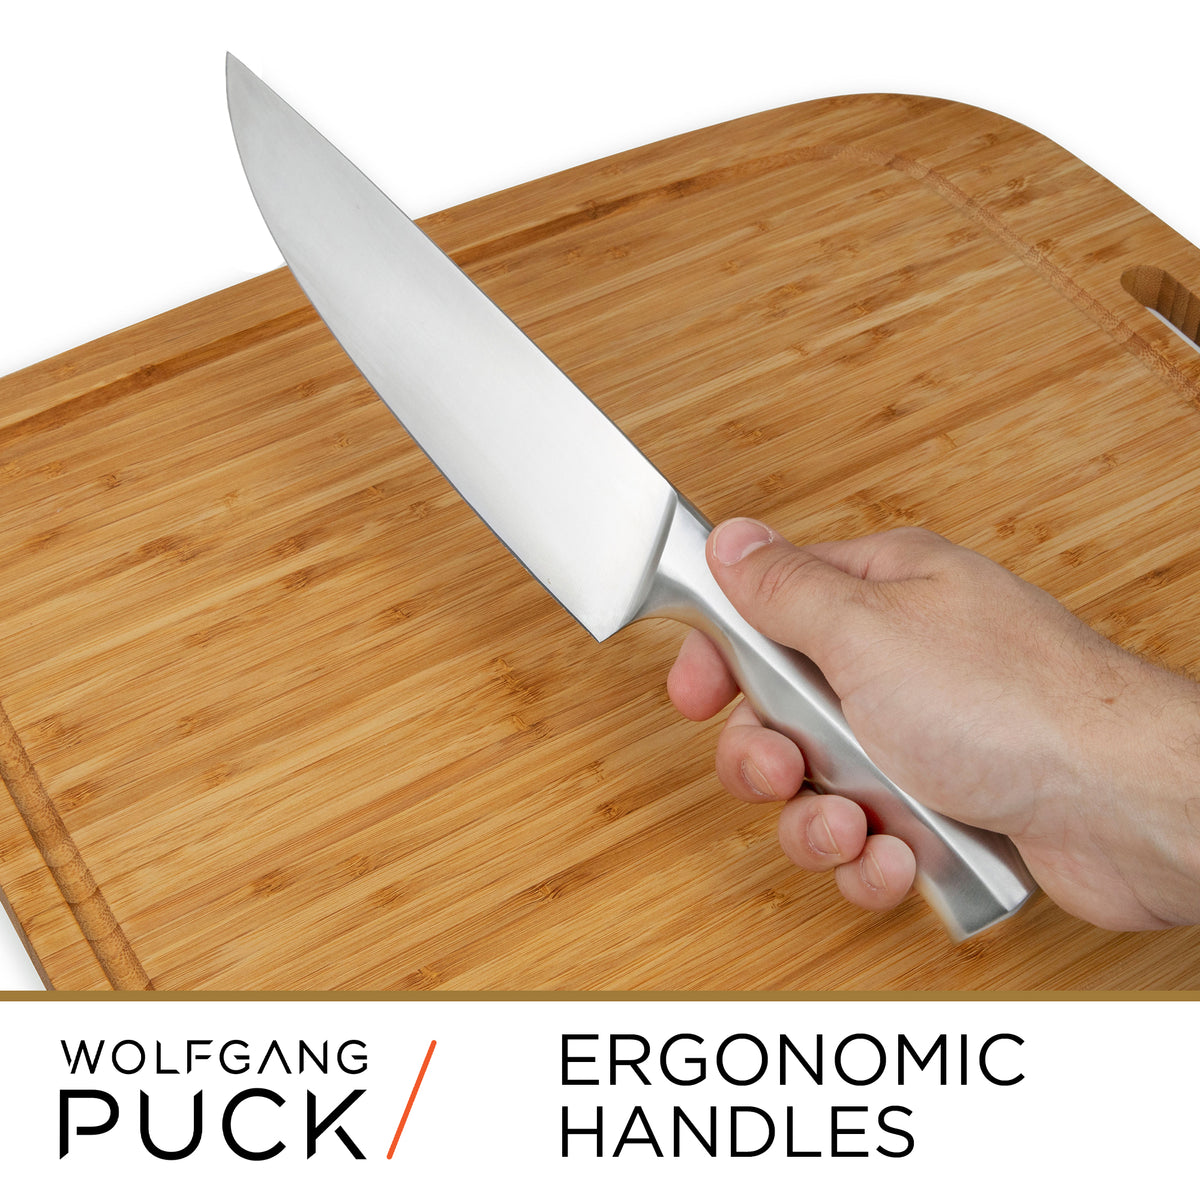 Wolfgang Puck 2 Sets of 3 Cheese Knives in Gift Boxes